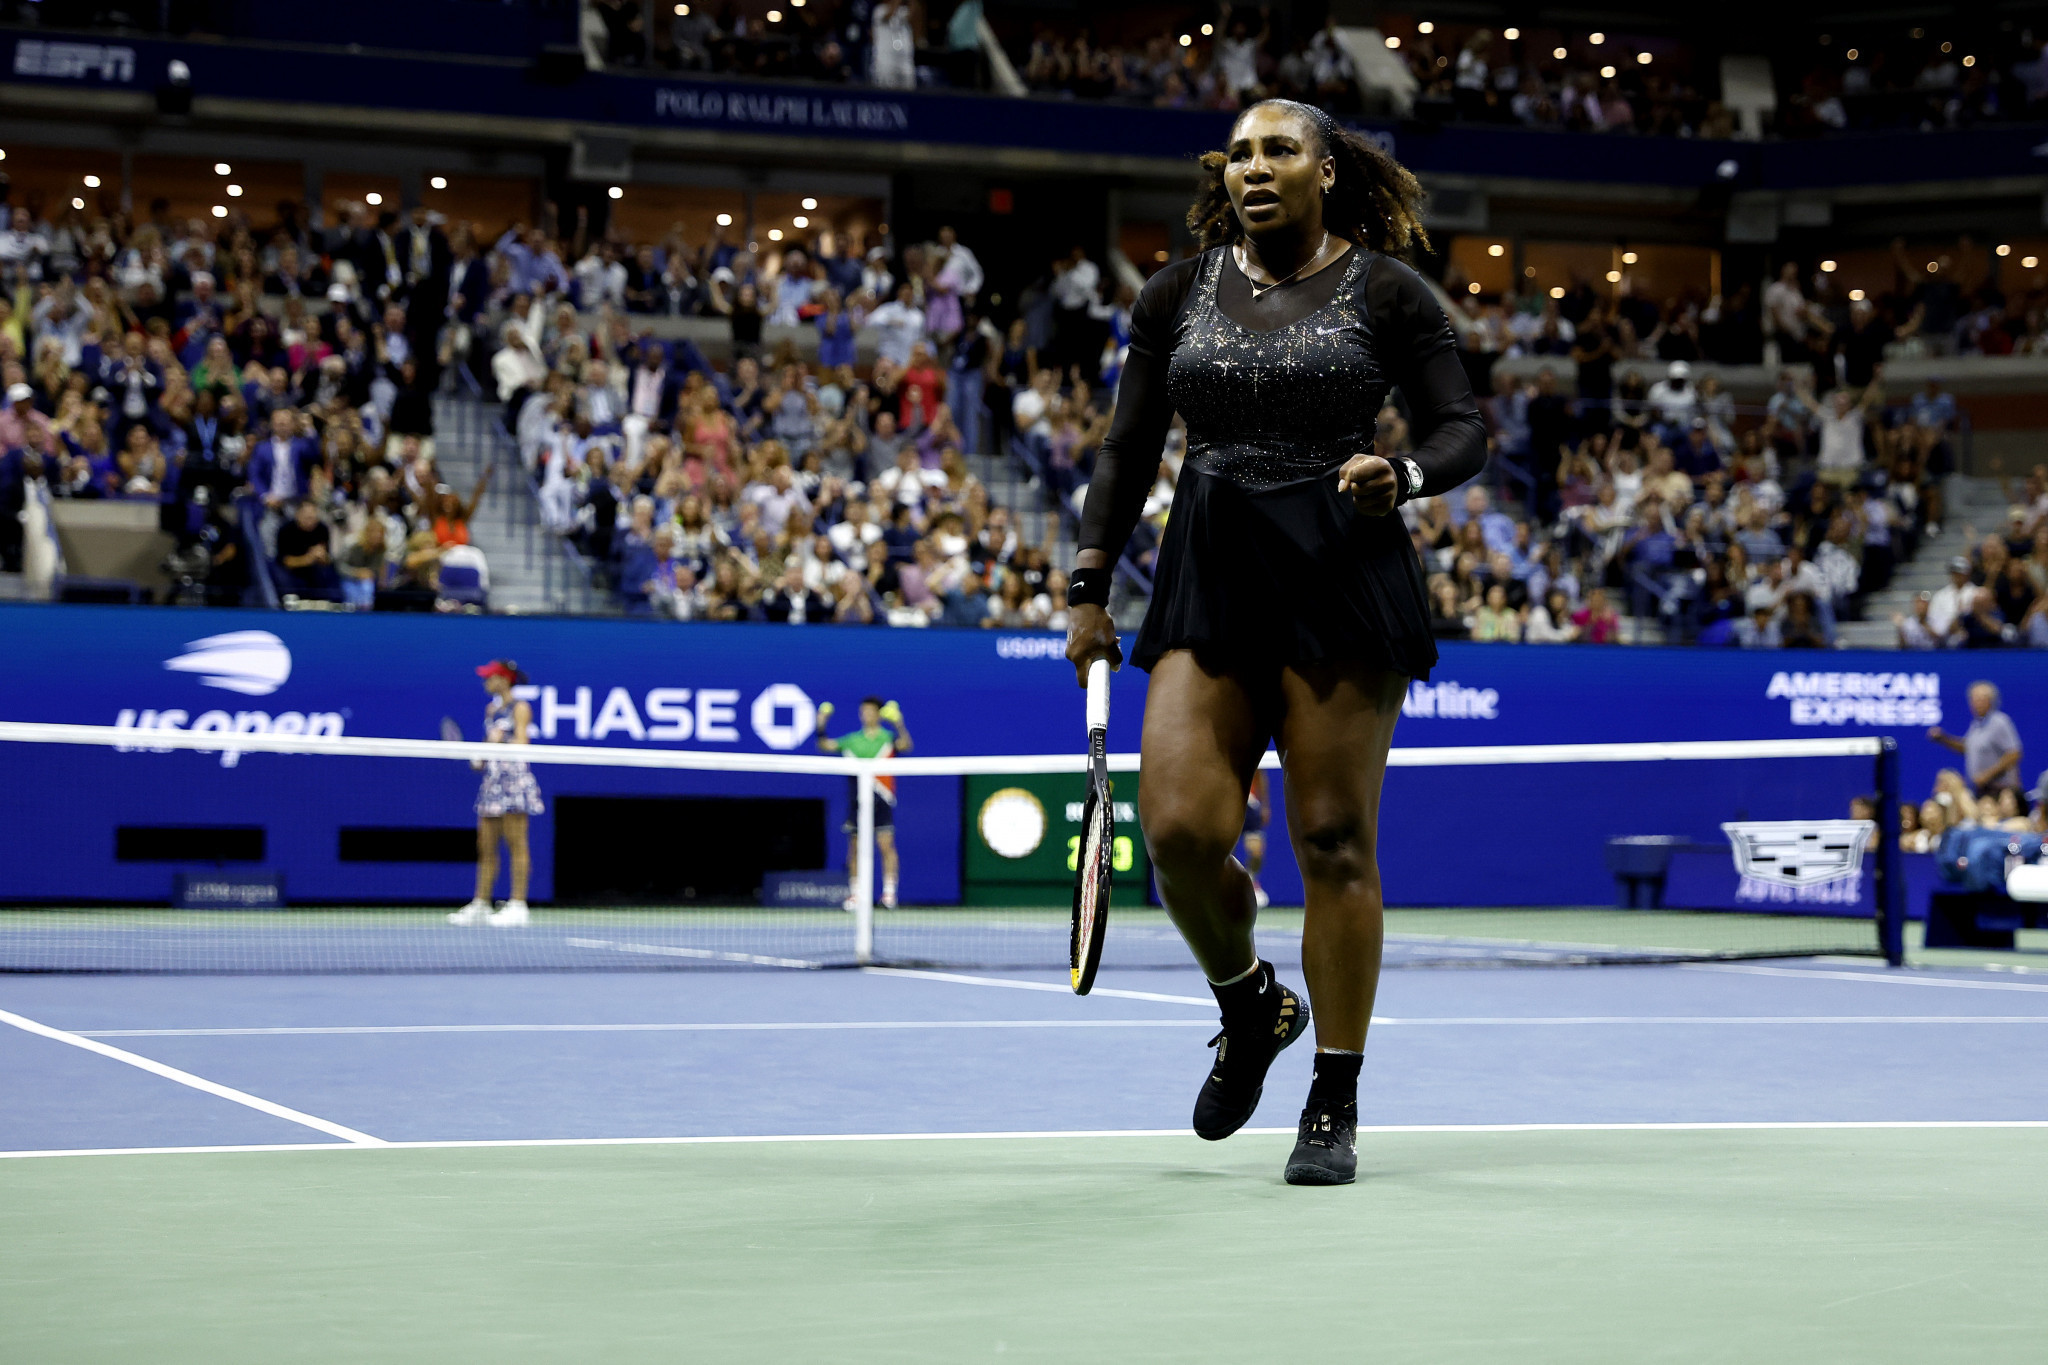 Tennis legend Serena Williams tweeted about more than any other female athlete